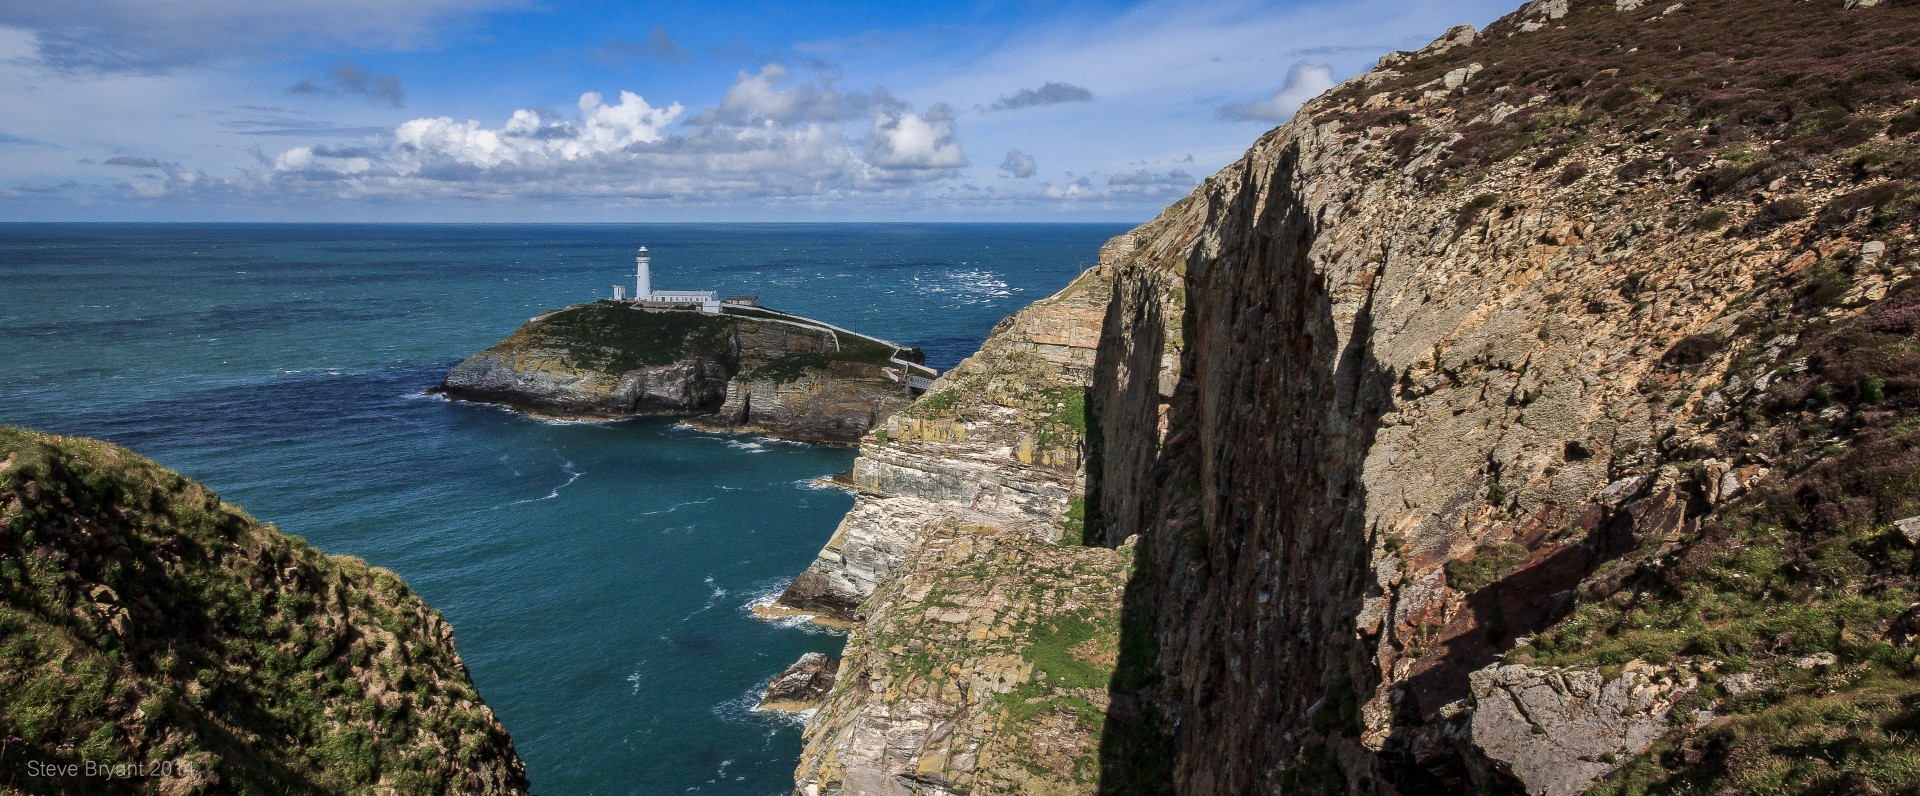 South Stack Lighthouse on the coast of Anglesey Wales .